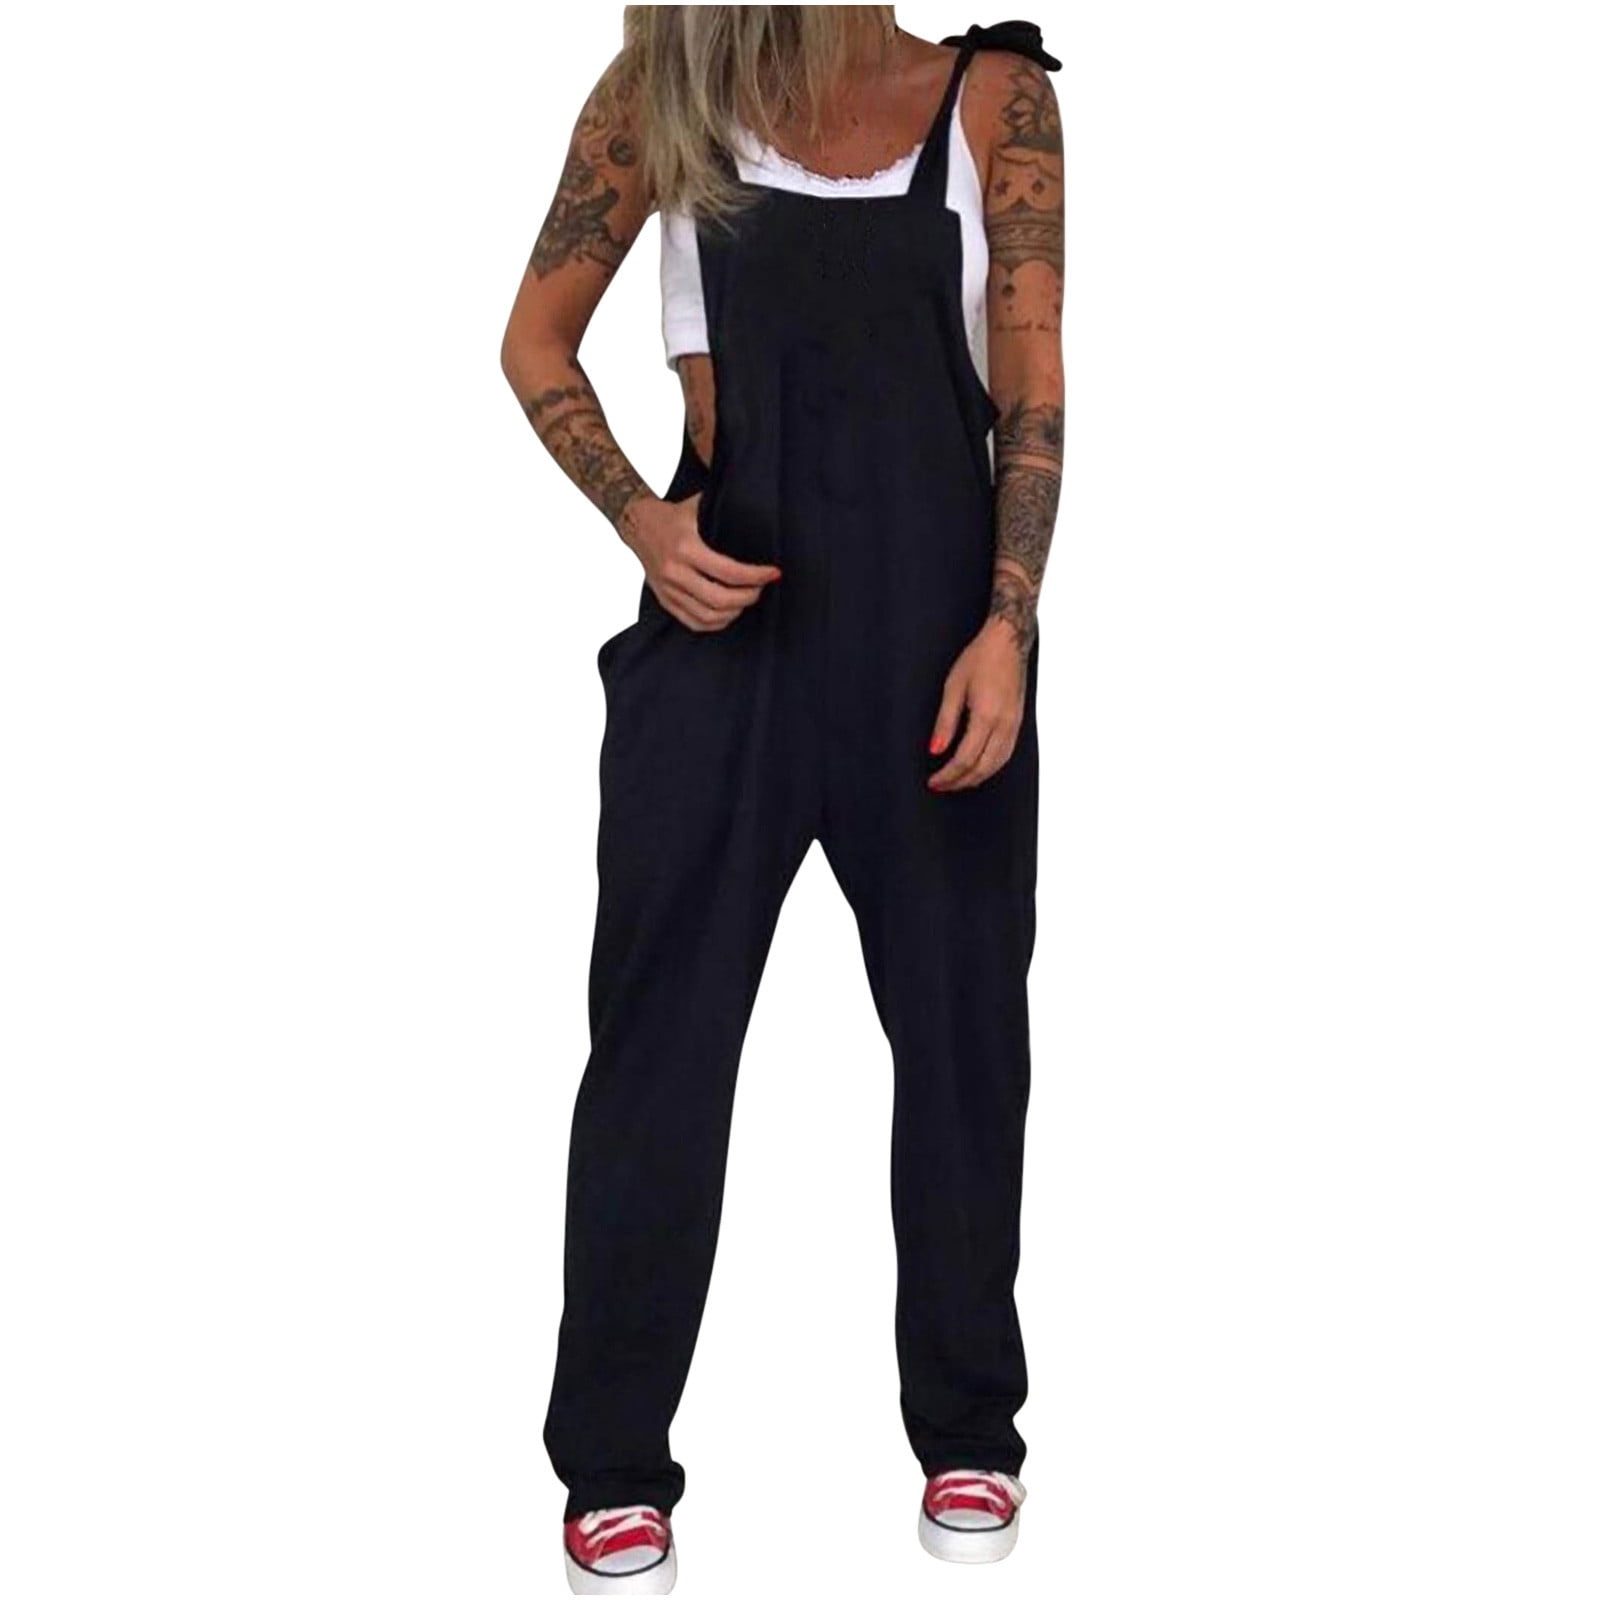 Women's Punk Style Overalls Jumpsuits Casual Baggy Dungarees Suspender Pants Skull Print Overalls Long Playsuit Strap Sleeveless Trousers With Pockets